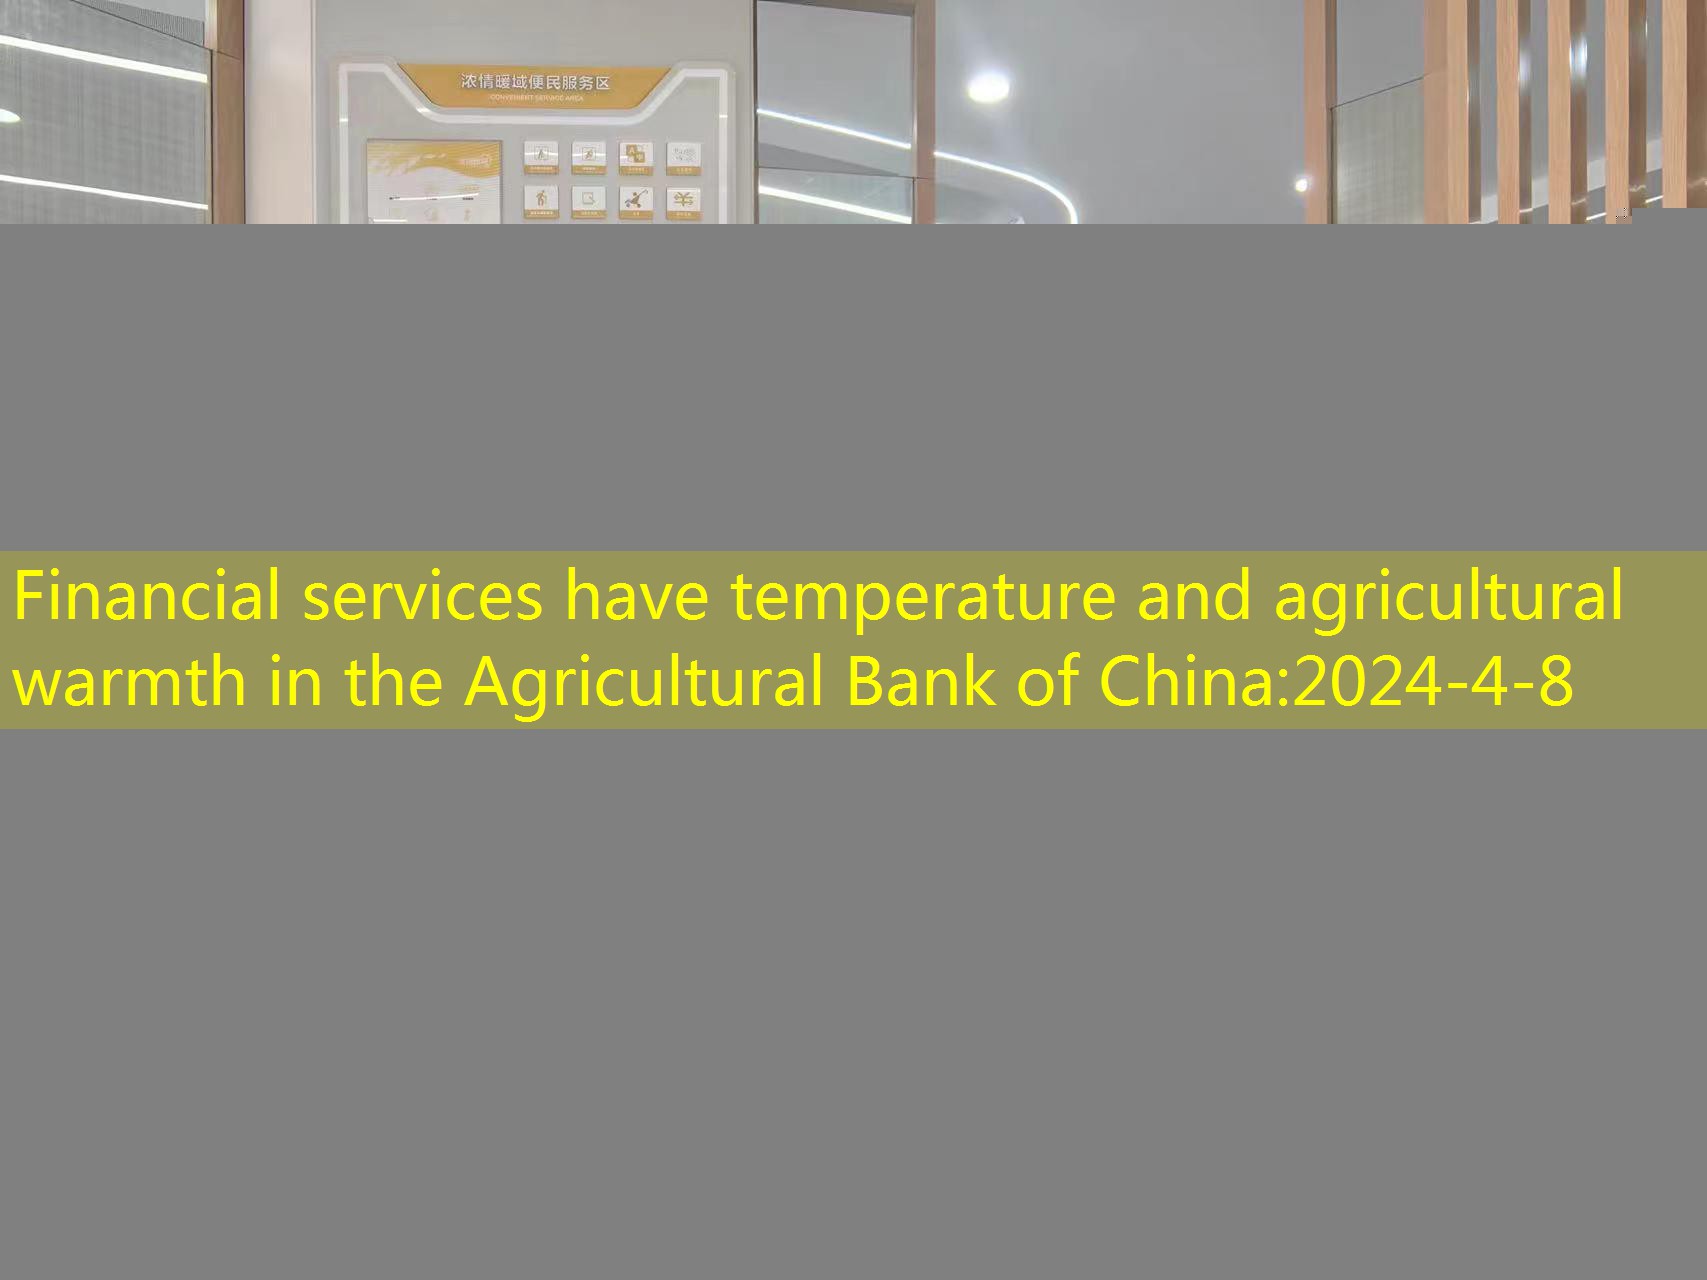 Financial services have temperature and agricultural warmth in the Agricultural Bank of China